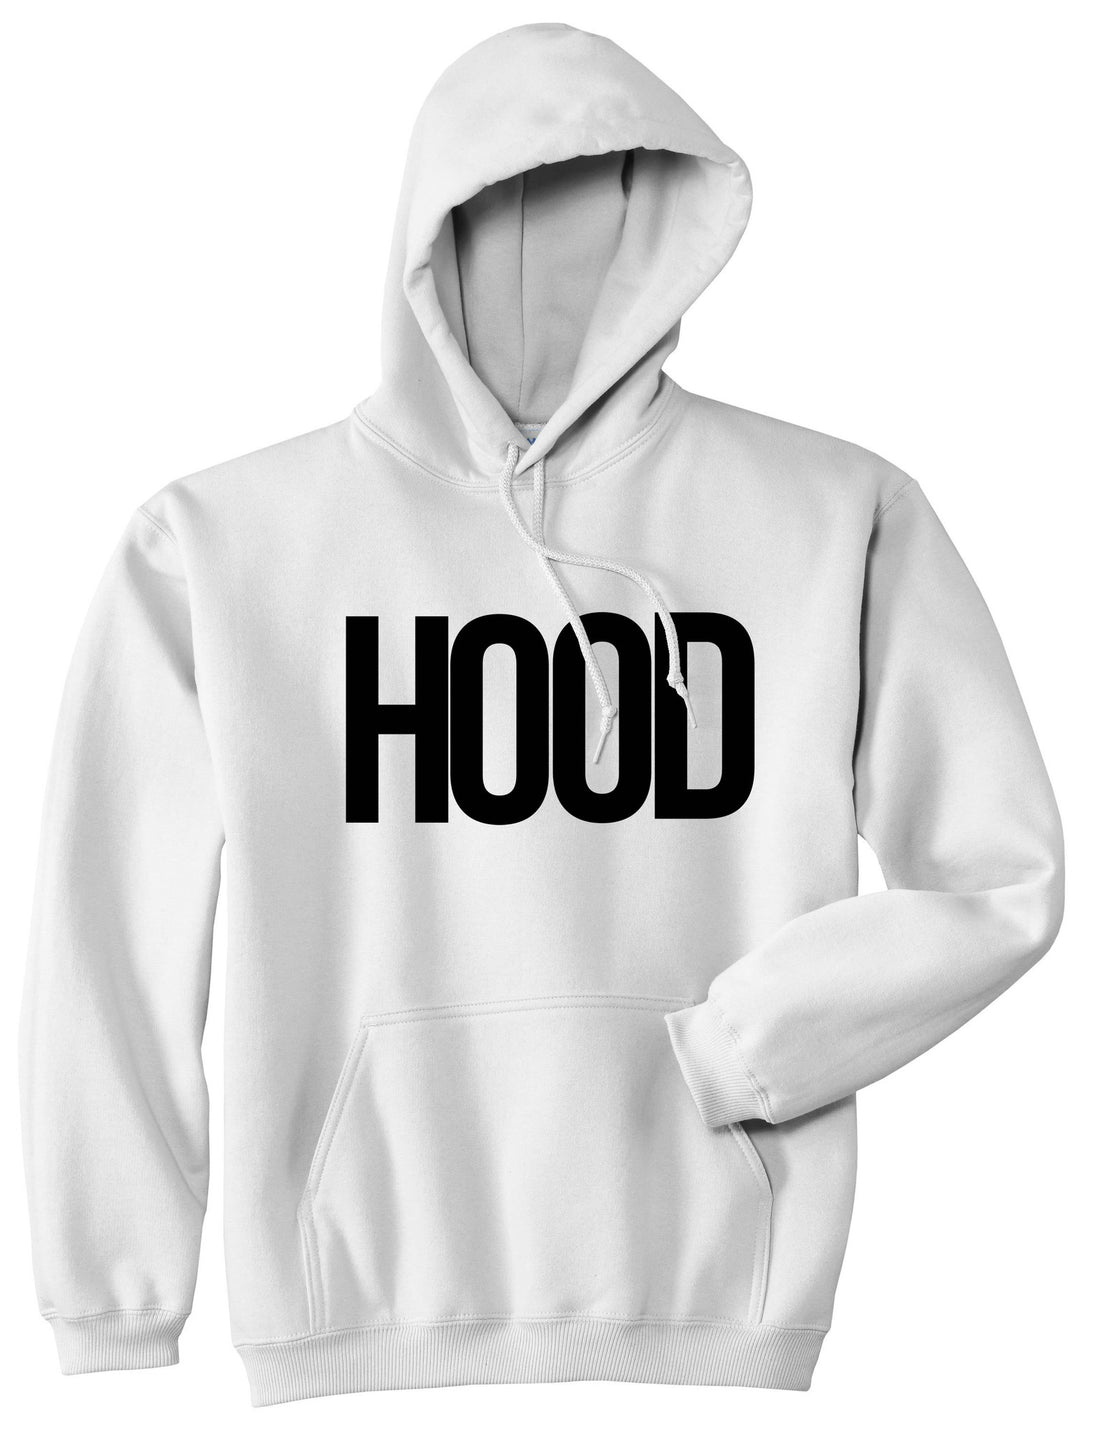 Hood Trap Style Compton New York Air Pullover Hoodie Hoody in White by Kings Of NY